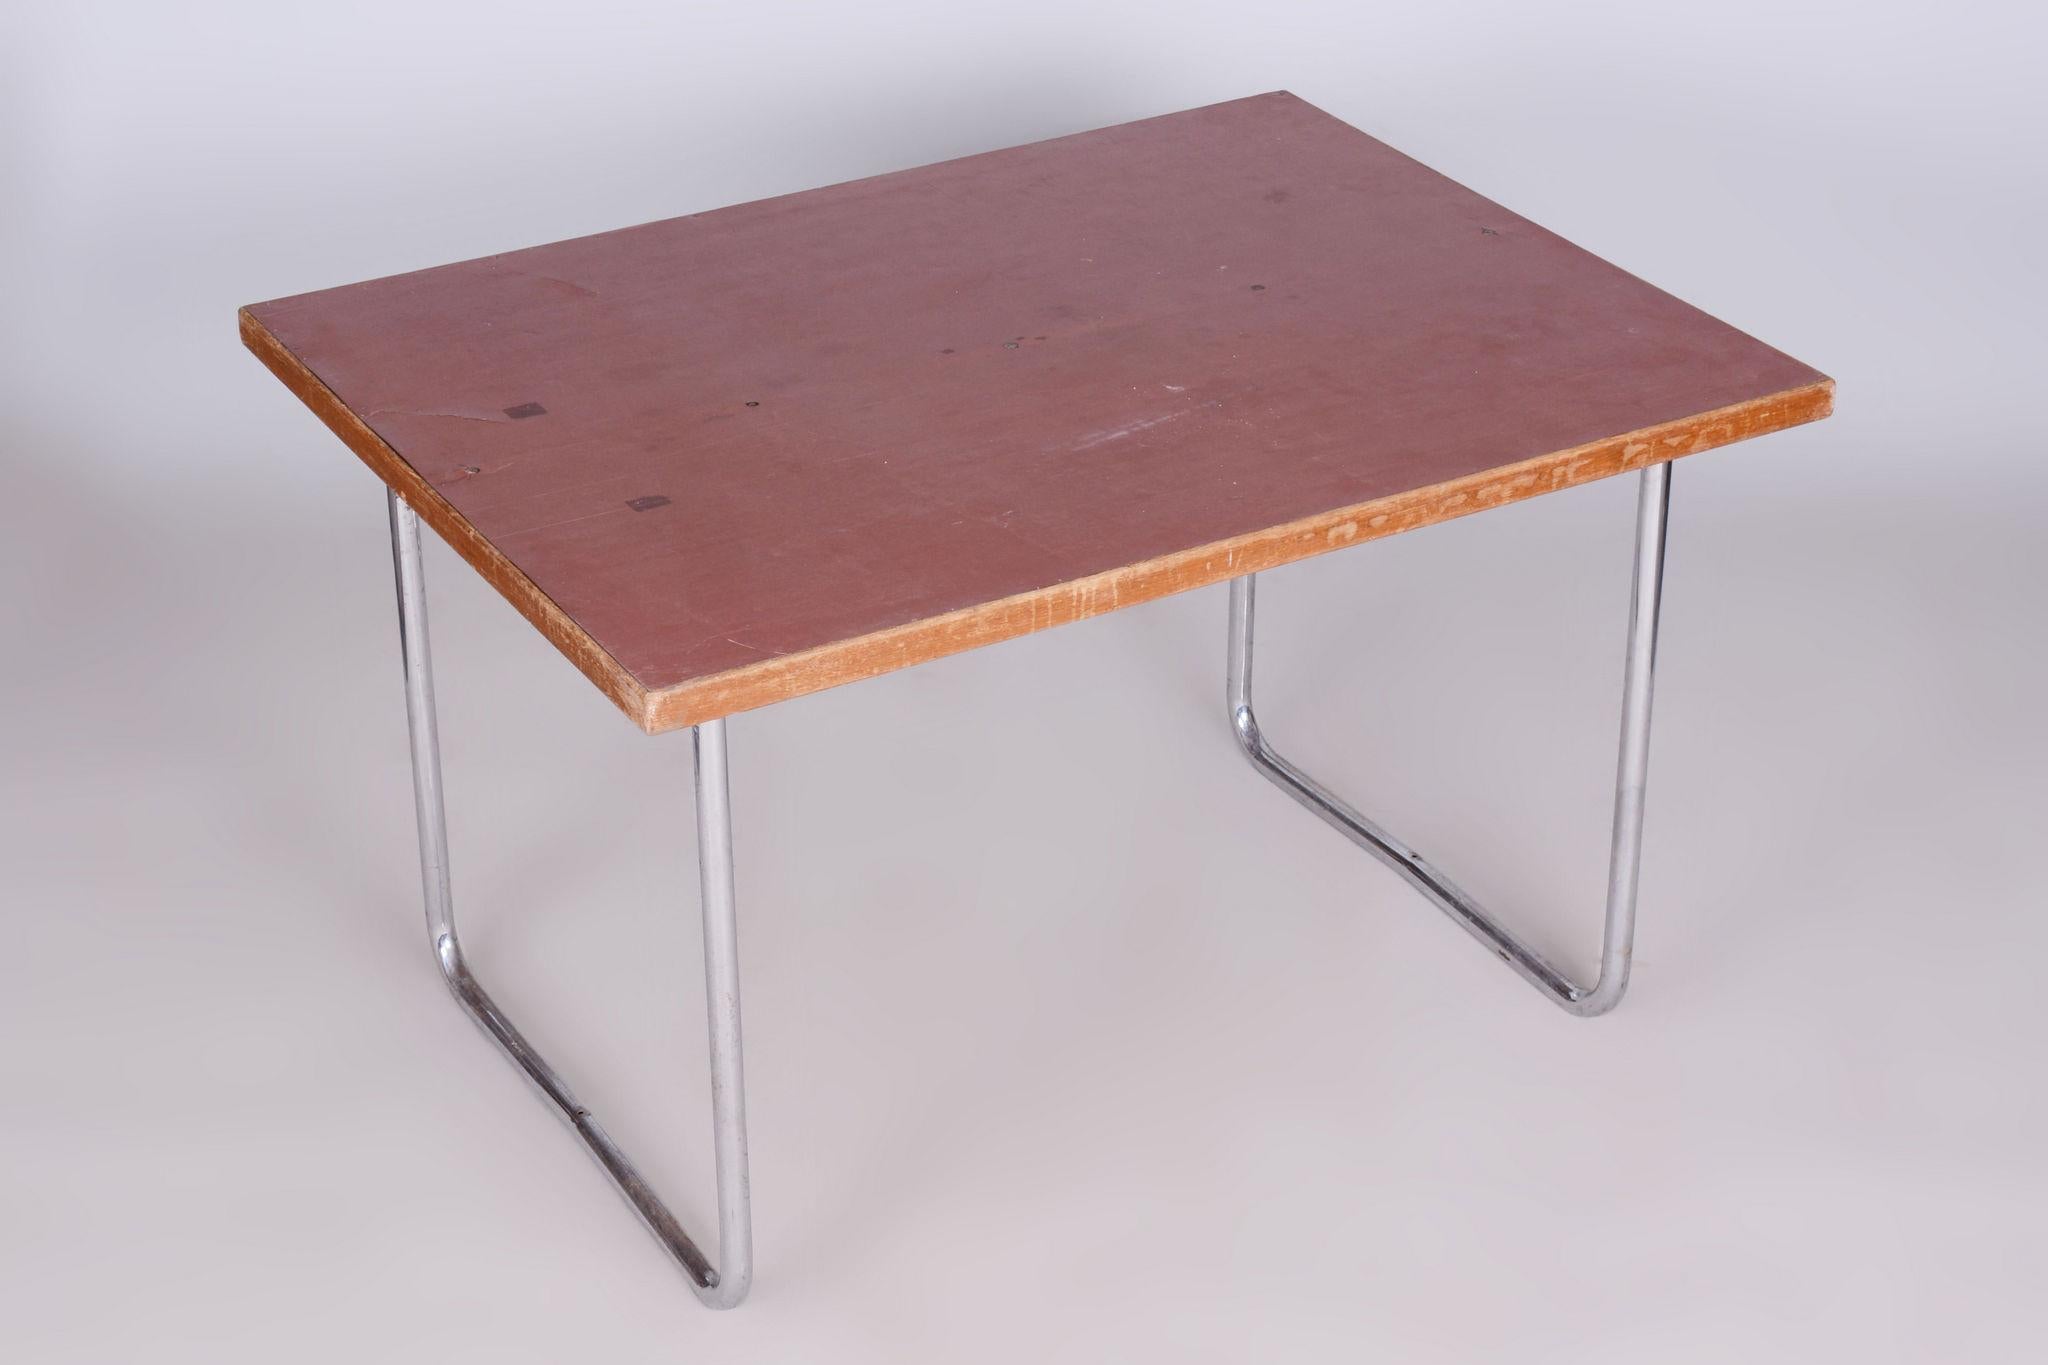 Mid-20th Century Original Bauhaus Dining Table, by Mücke - Melder, Well Preserved, Czech, 1930s For Sale